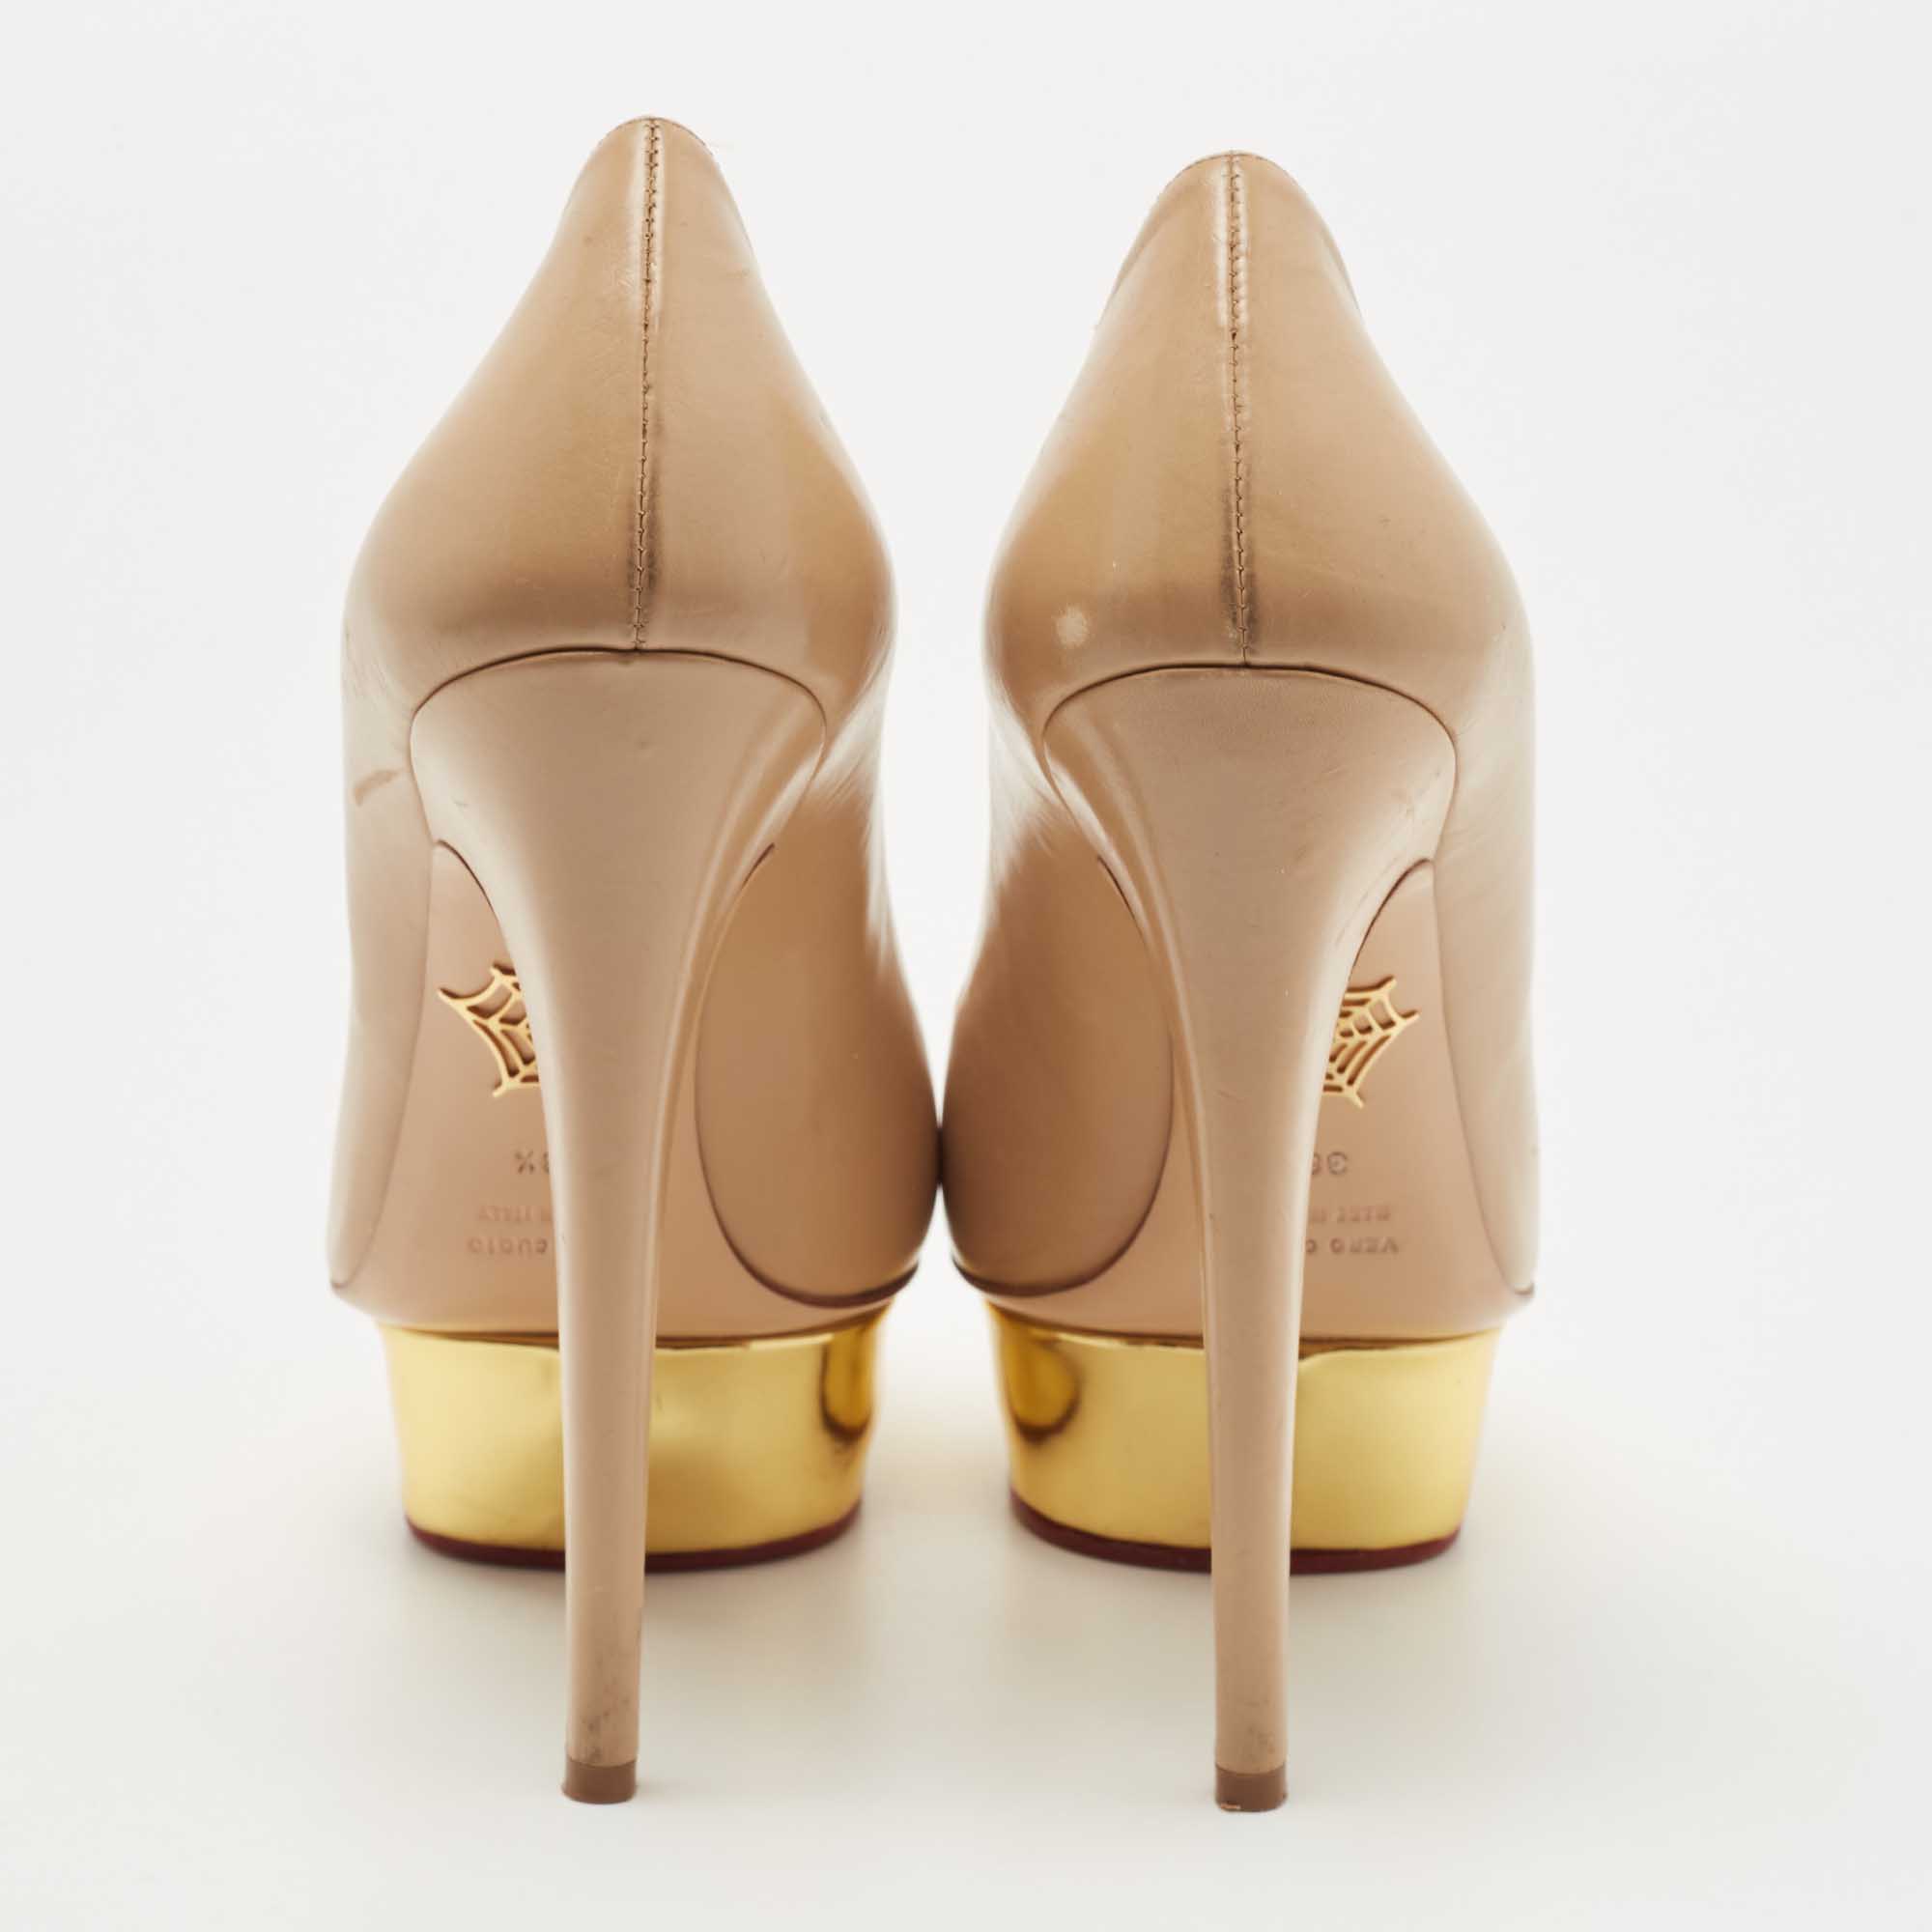 Charlotte Olympia Beige Leather Dolly Platform Pumps Size 38.5